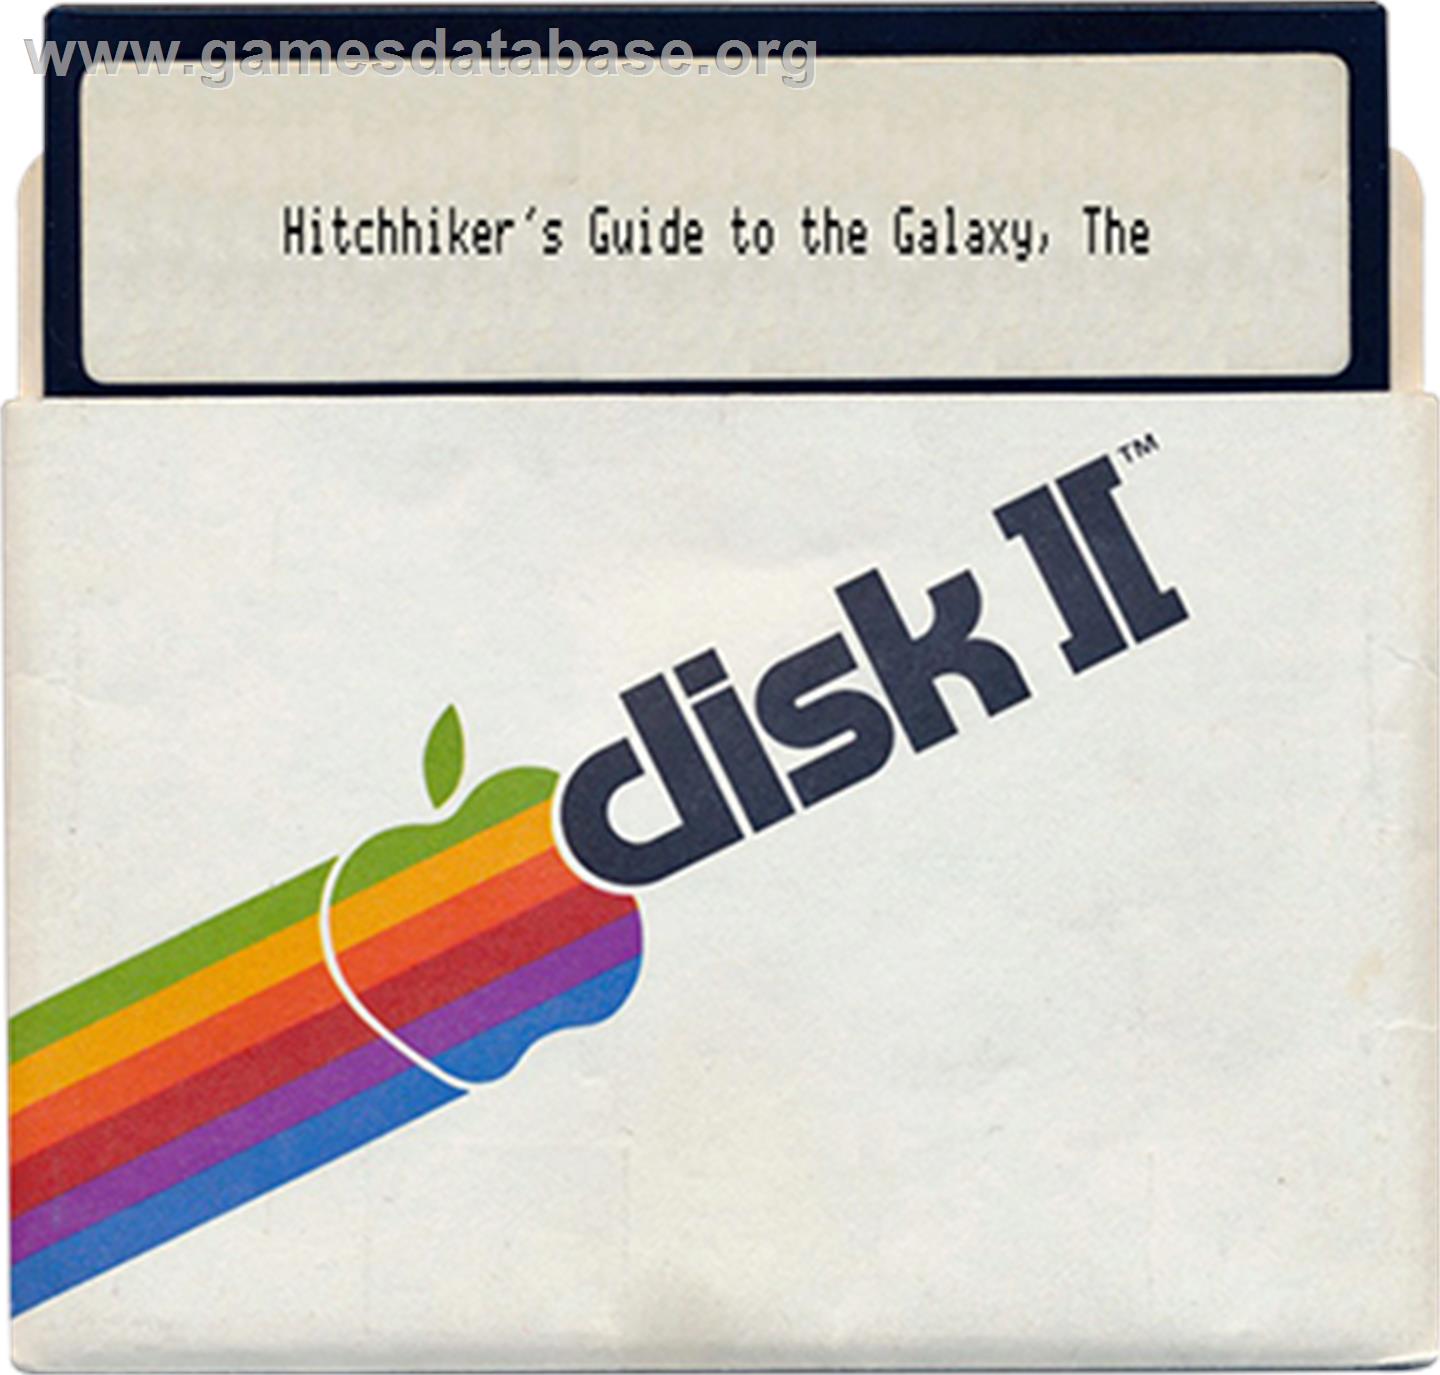 Hitch Hiker's Guide to the Galaxy - Apple II - Artwork - Disc